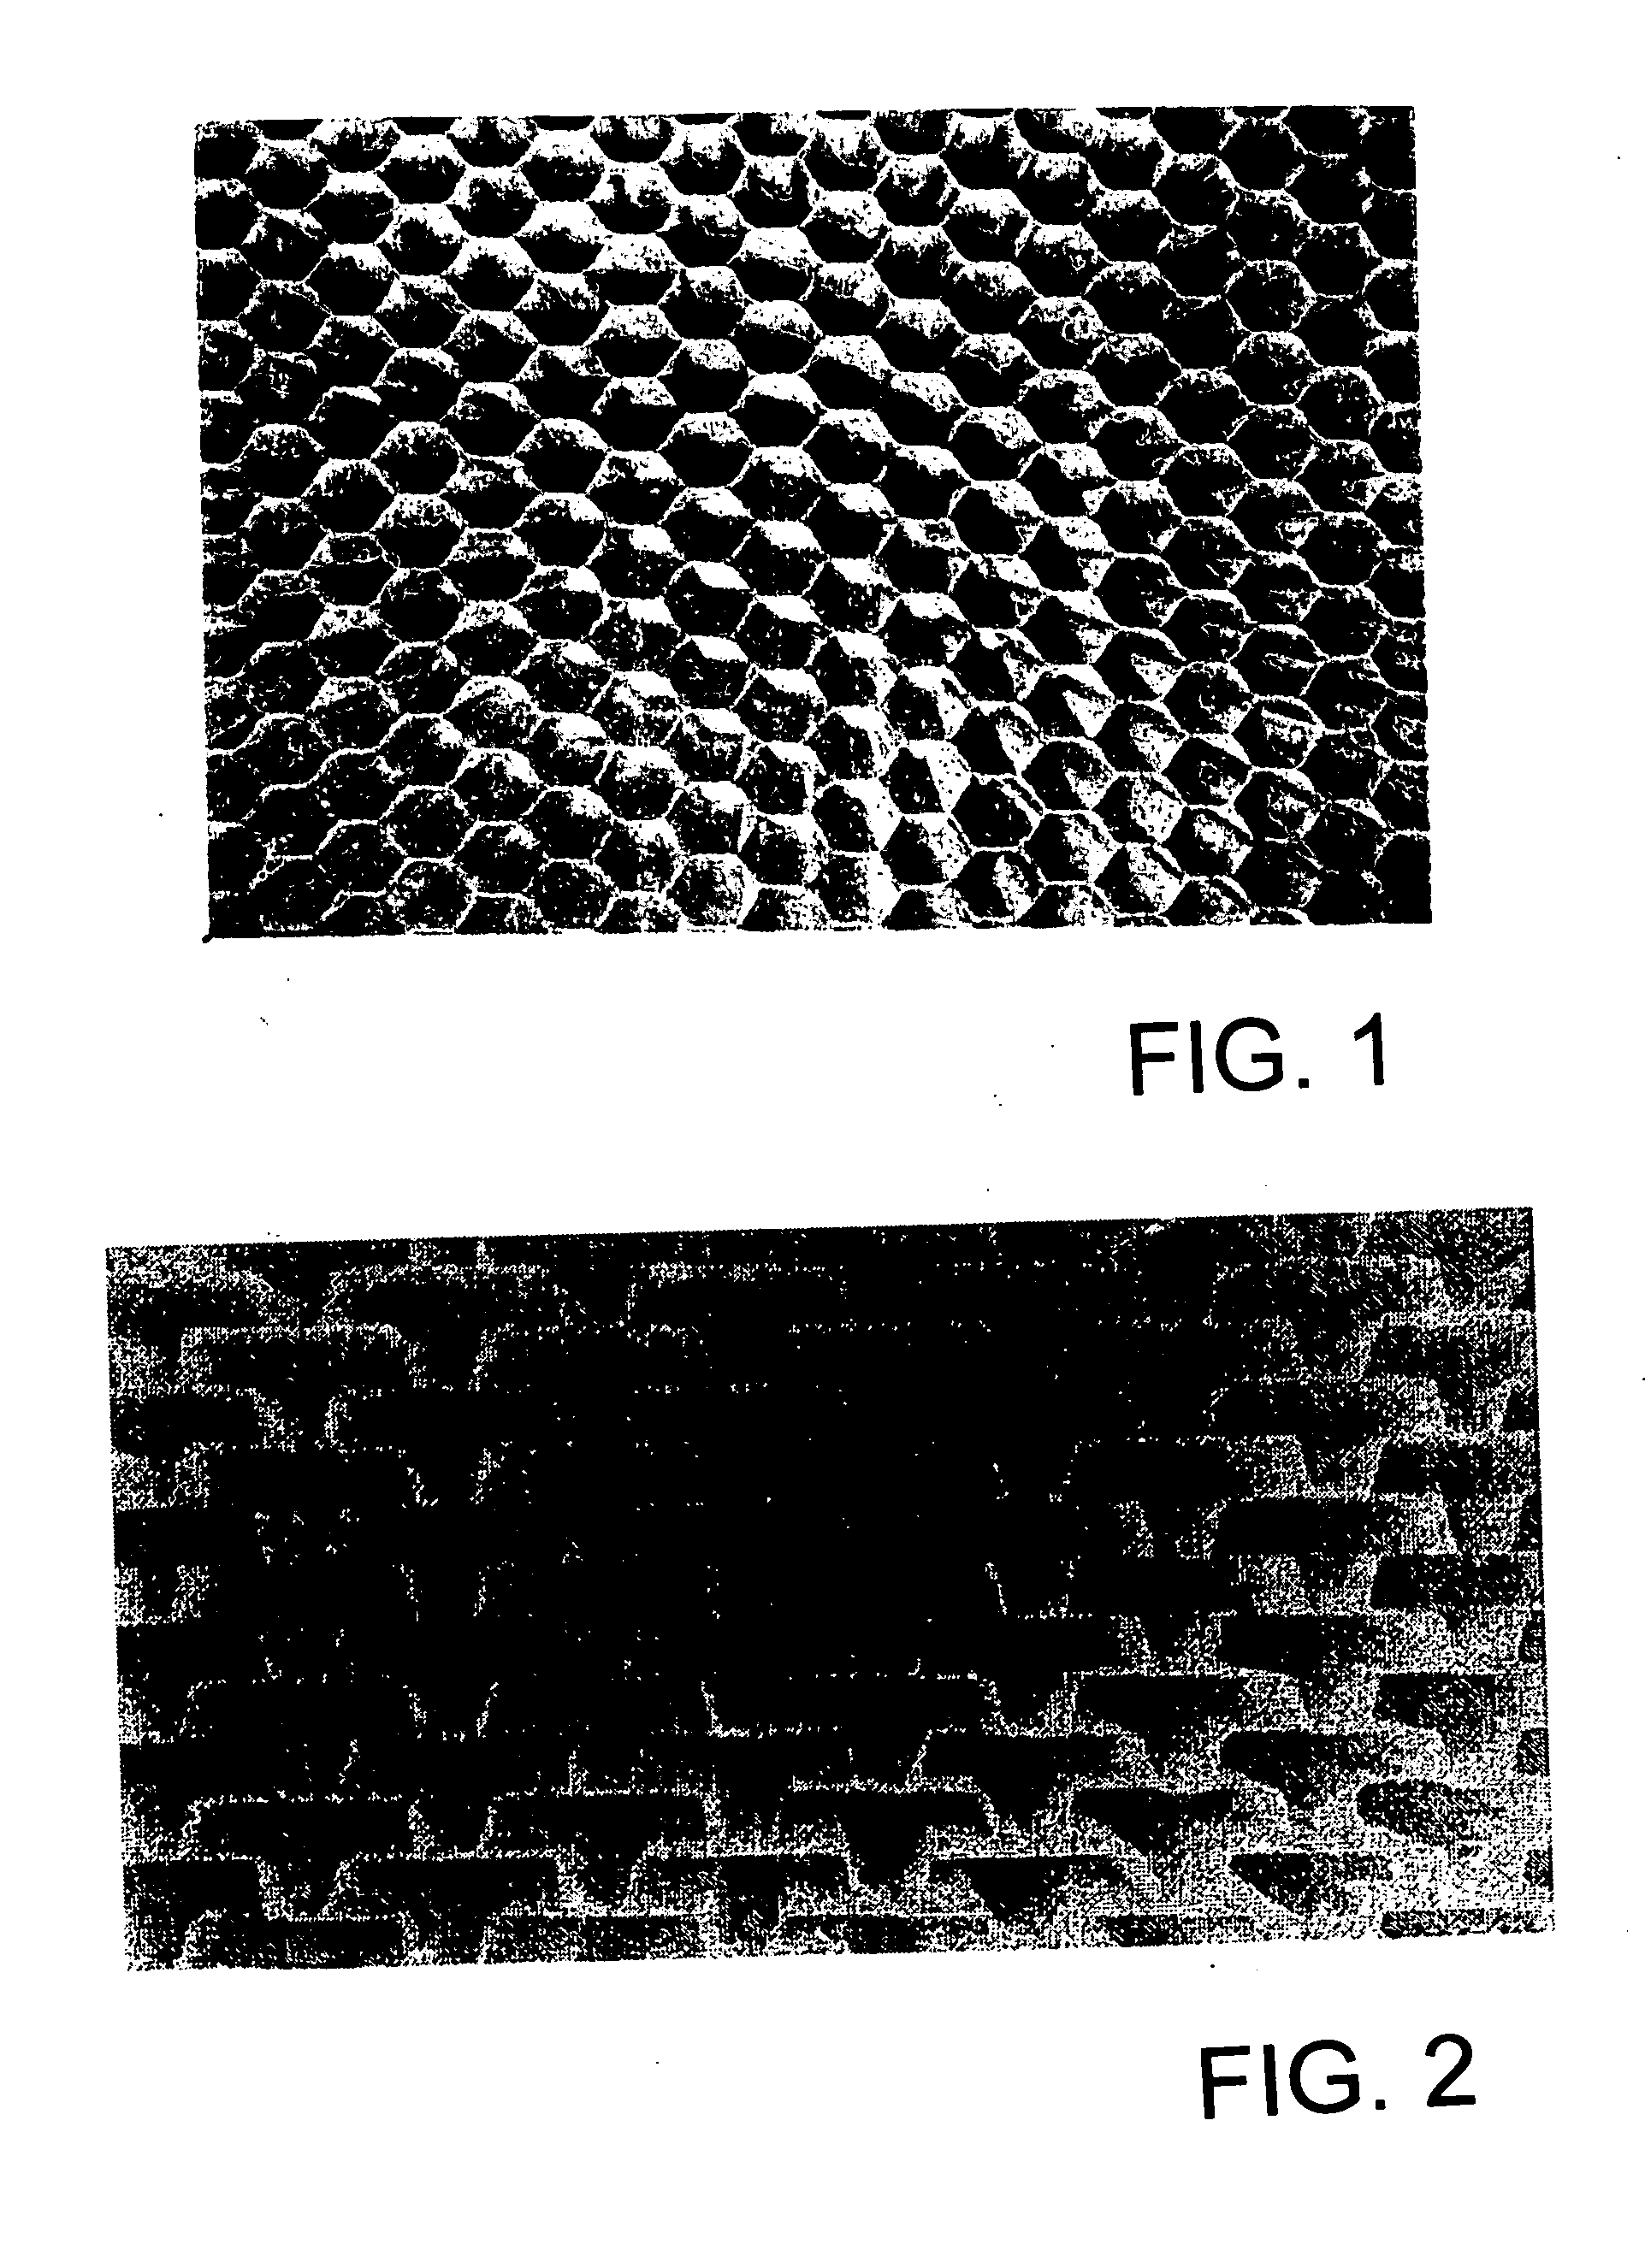 Honeycomb composite silicon carbide mirrors and structures